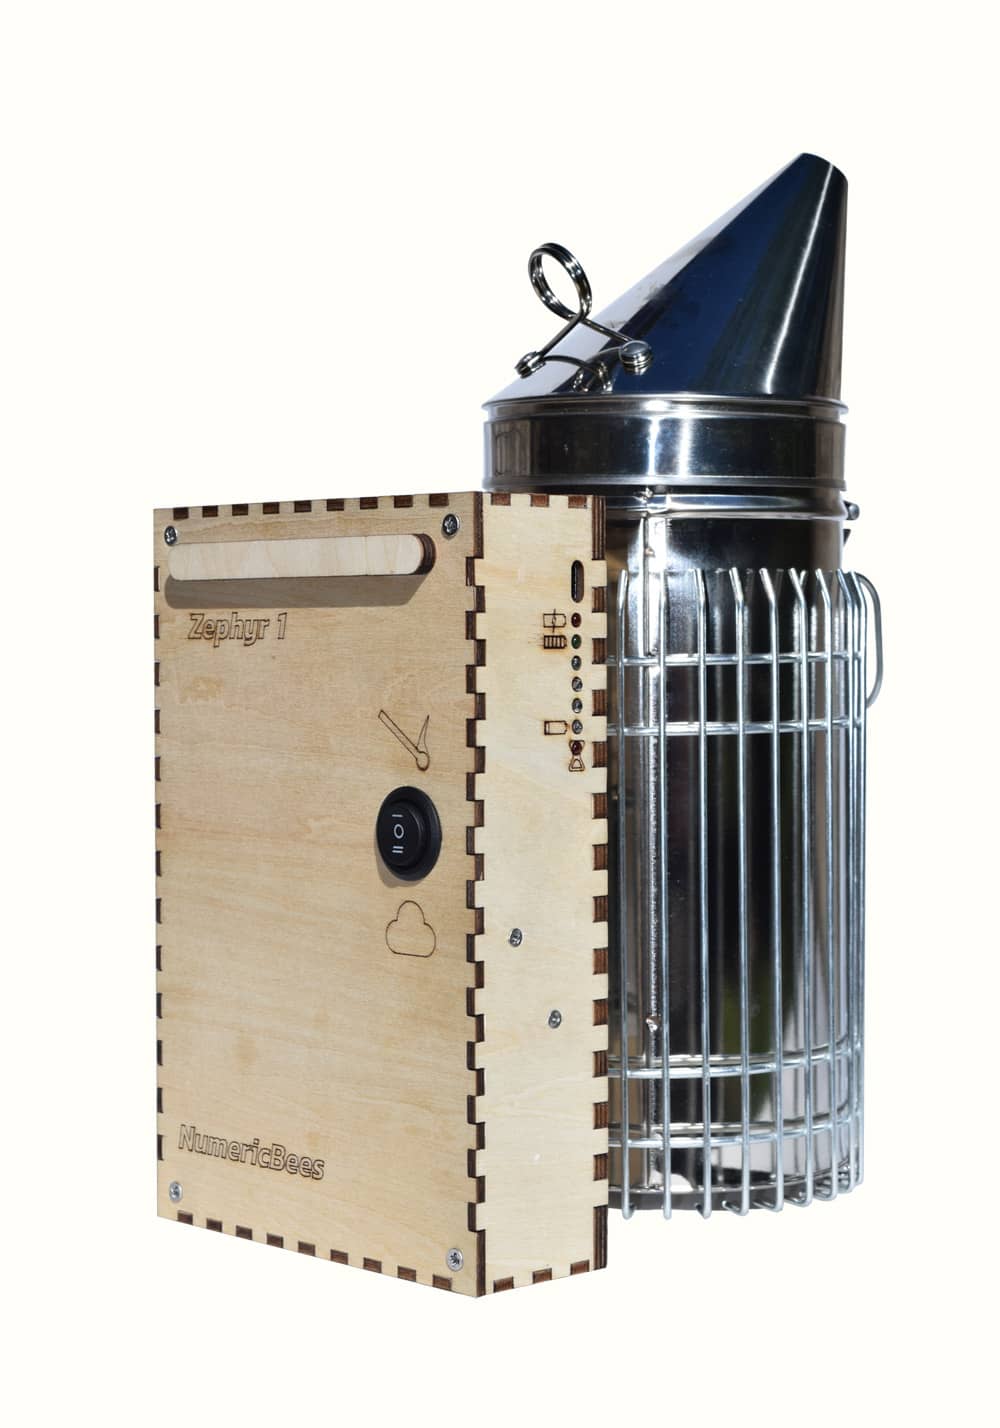 Zephyr, the electric blower bee smoker that simplifies the life of beekeepers.